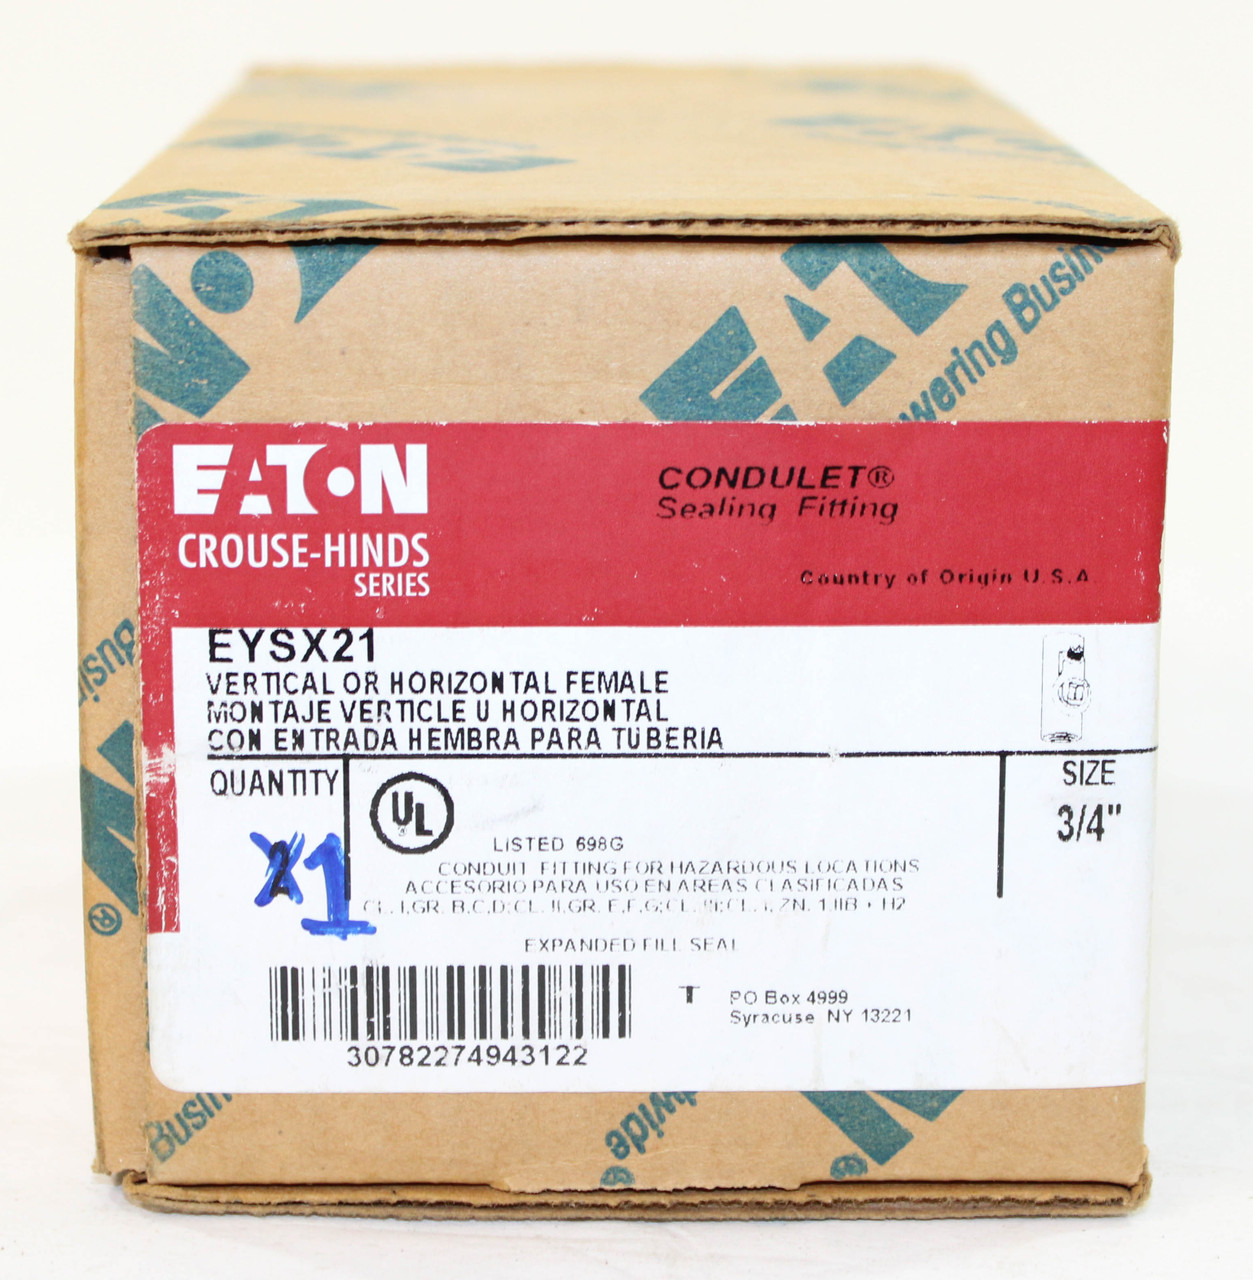 Eaton EYSX21 Expanded Fill Sealing Fitting 3/4 Inch